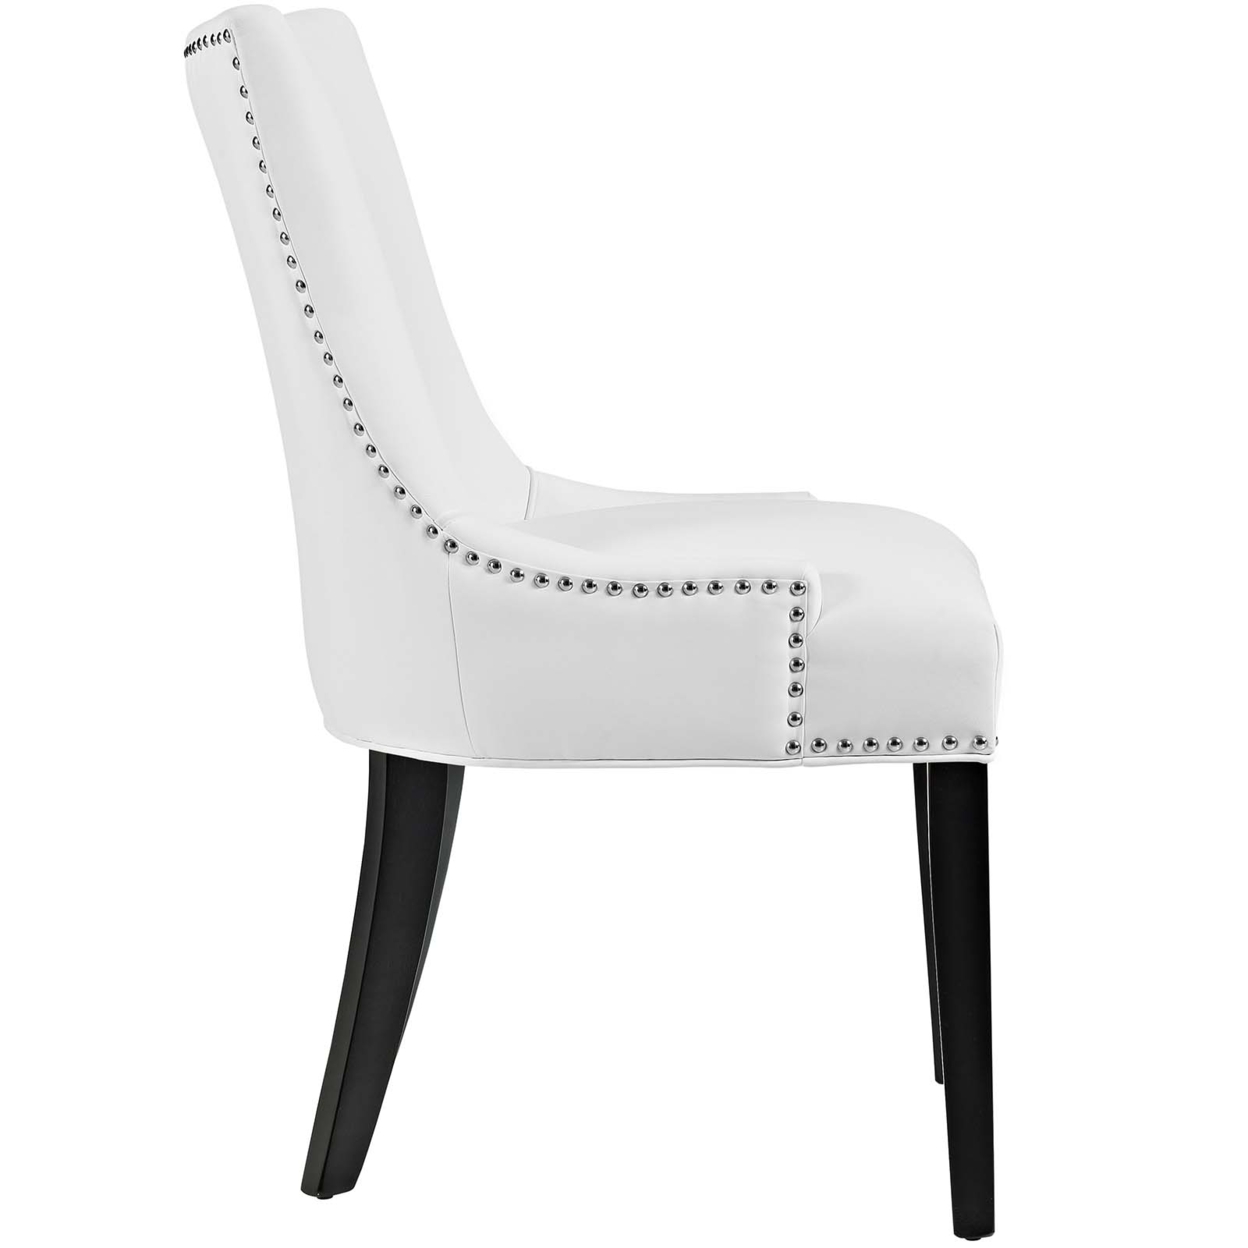 Marquis Dining Chair Faux Leather Set Of 2,White